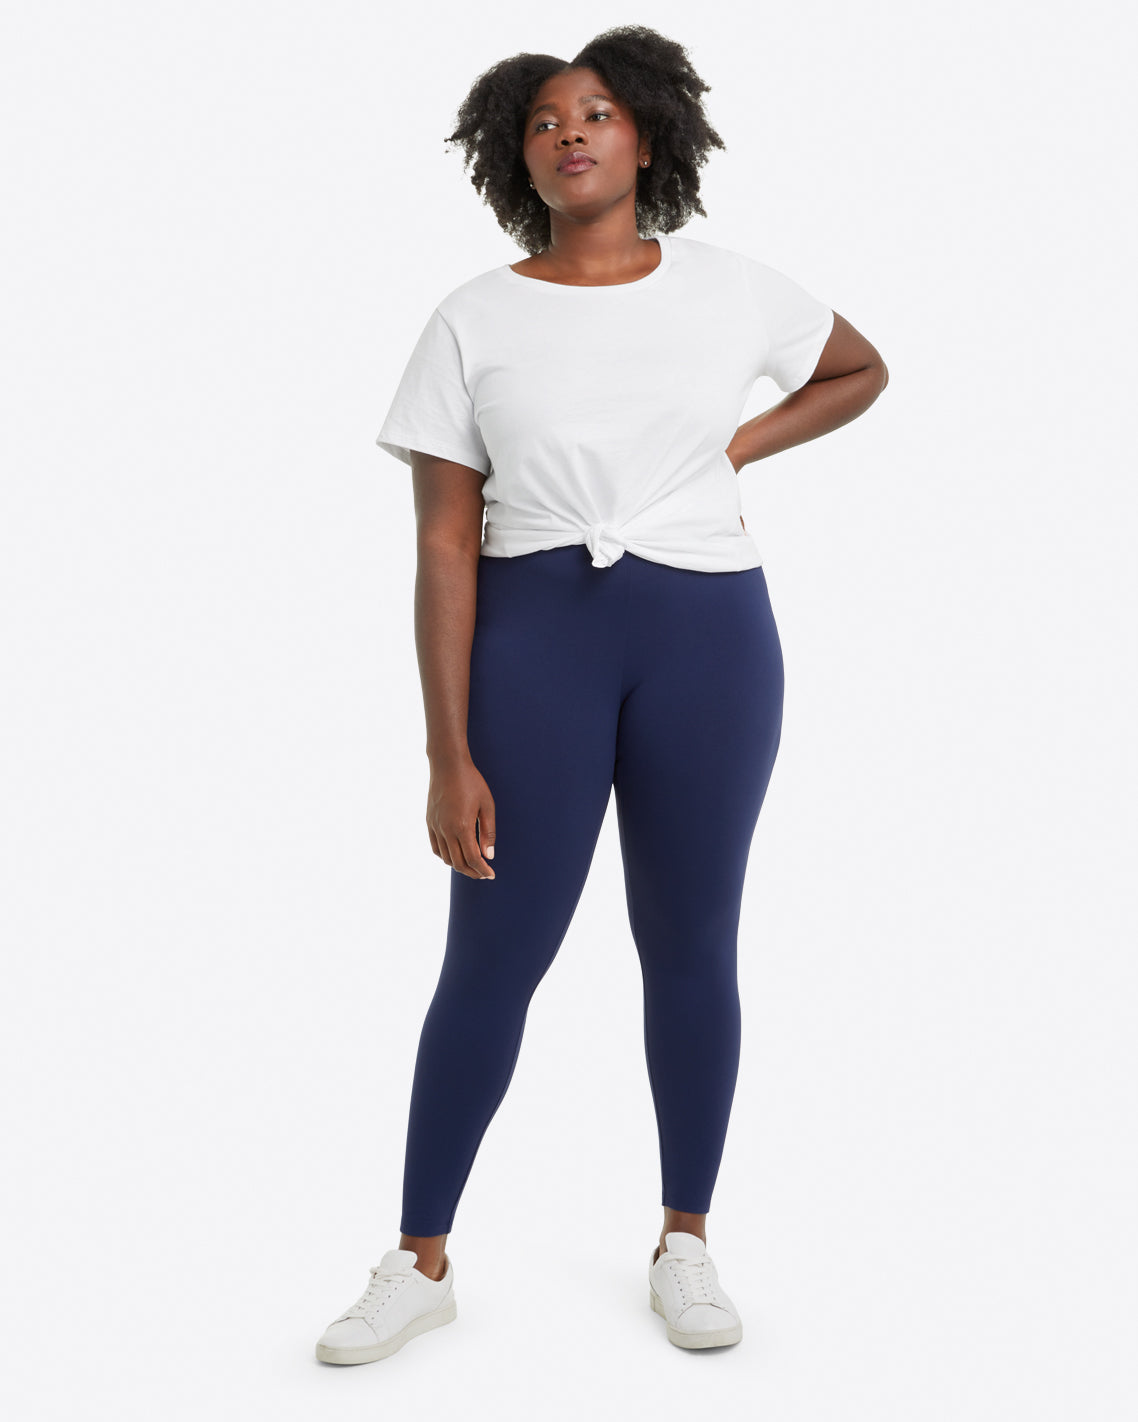 Chalk It Up to Love - Women's Extra Plus 3x/4x Size Leggings – Apple Girl  Boutique